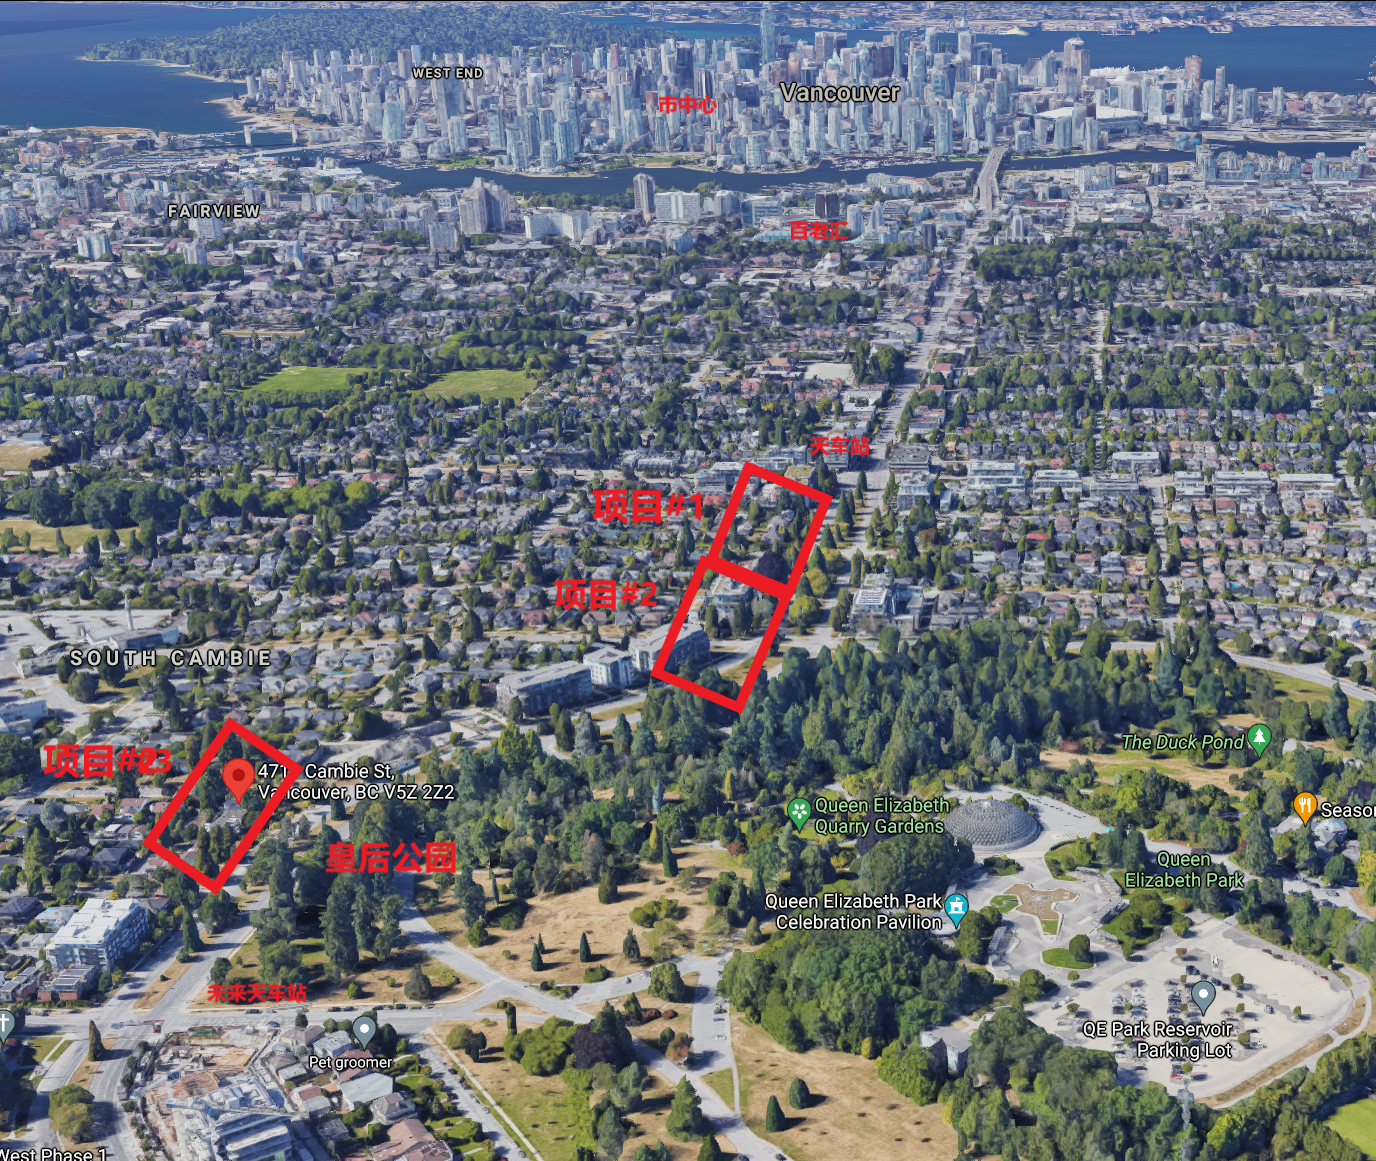 Main Photo: 4215-4787 Cambie Street in Vancouver: Commercial for sale (Three blocks Land Assembly)  : MLS®# R2559219,R2559141,R2559154,R2559